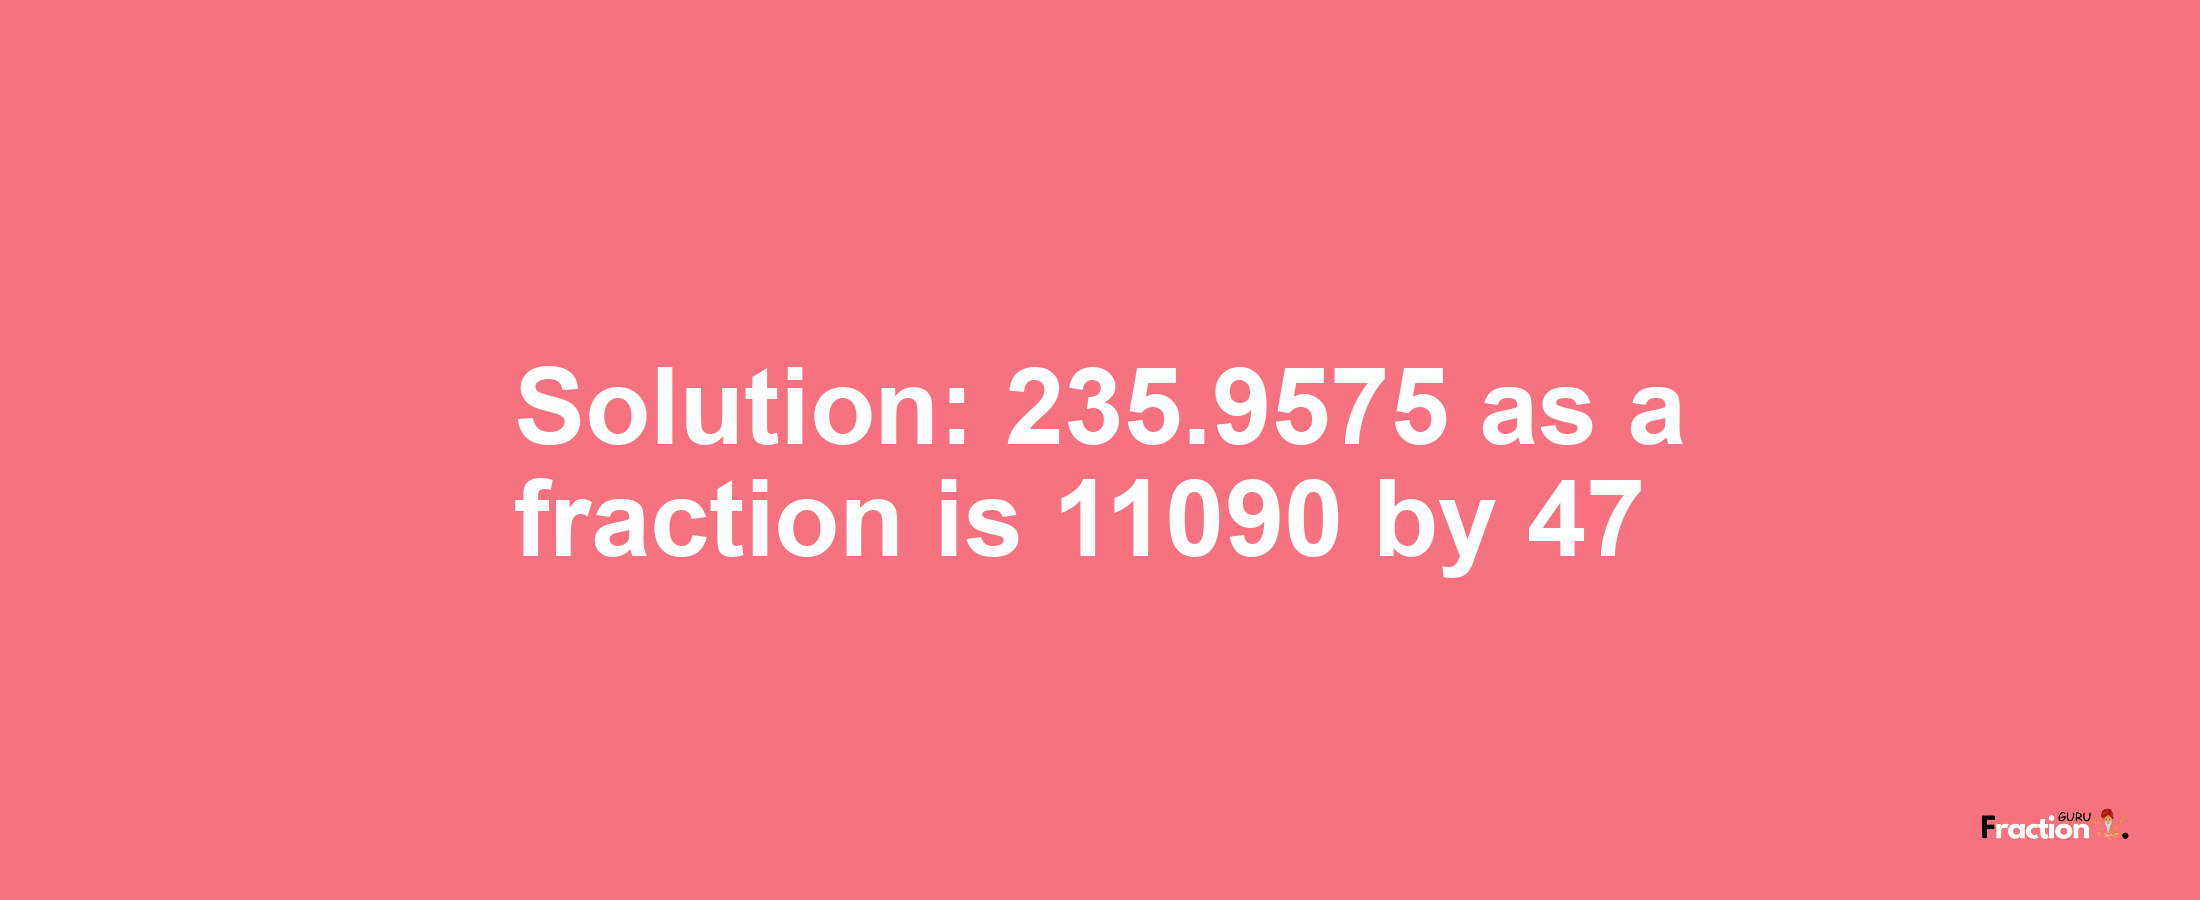 Solution:235.9575 as a fraction is 11090/47